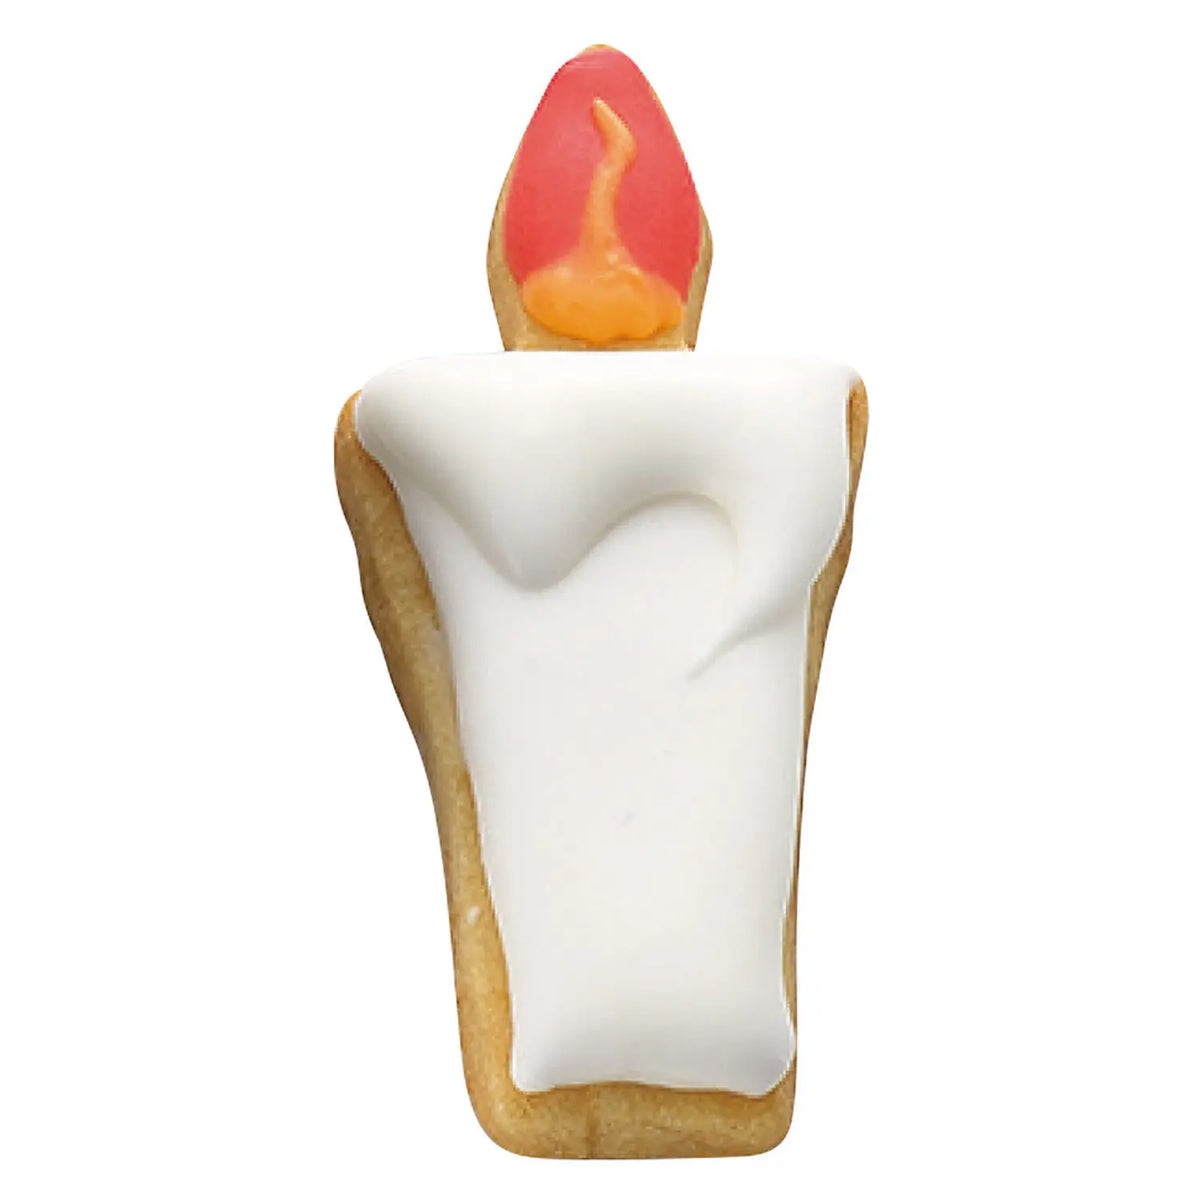 TIGERCROWN Cake Land Stainless Steel Cookie Cutter Candle